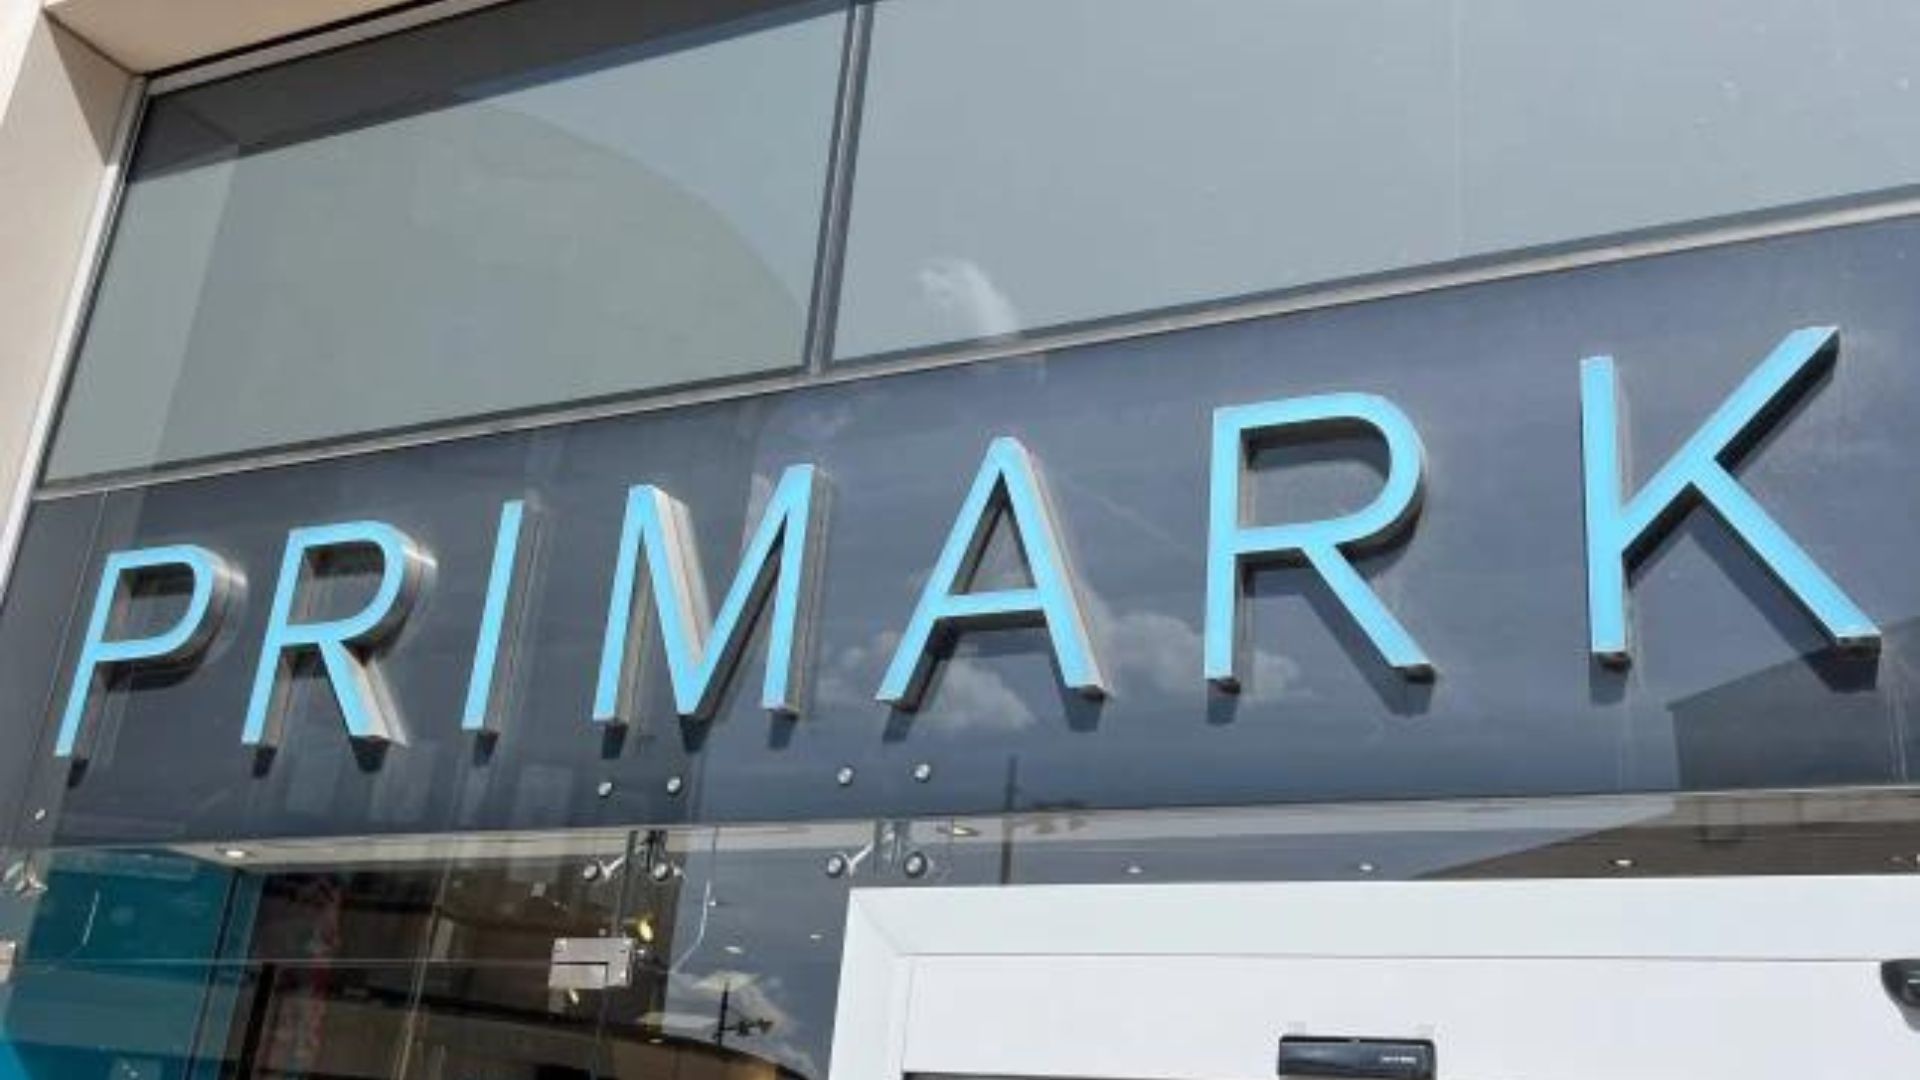 Why is Primark called Primark